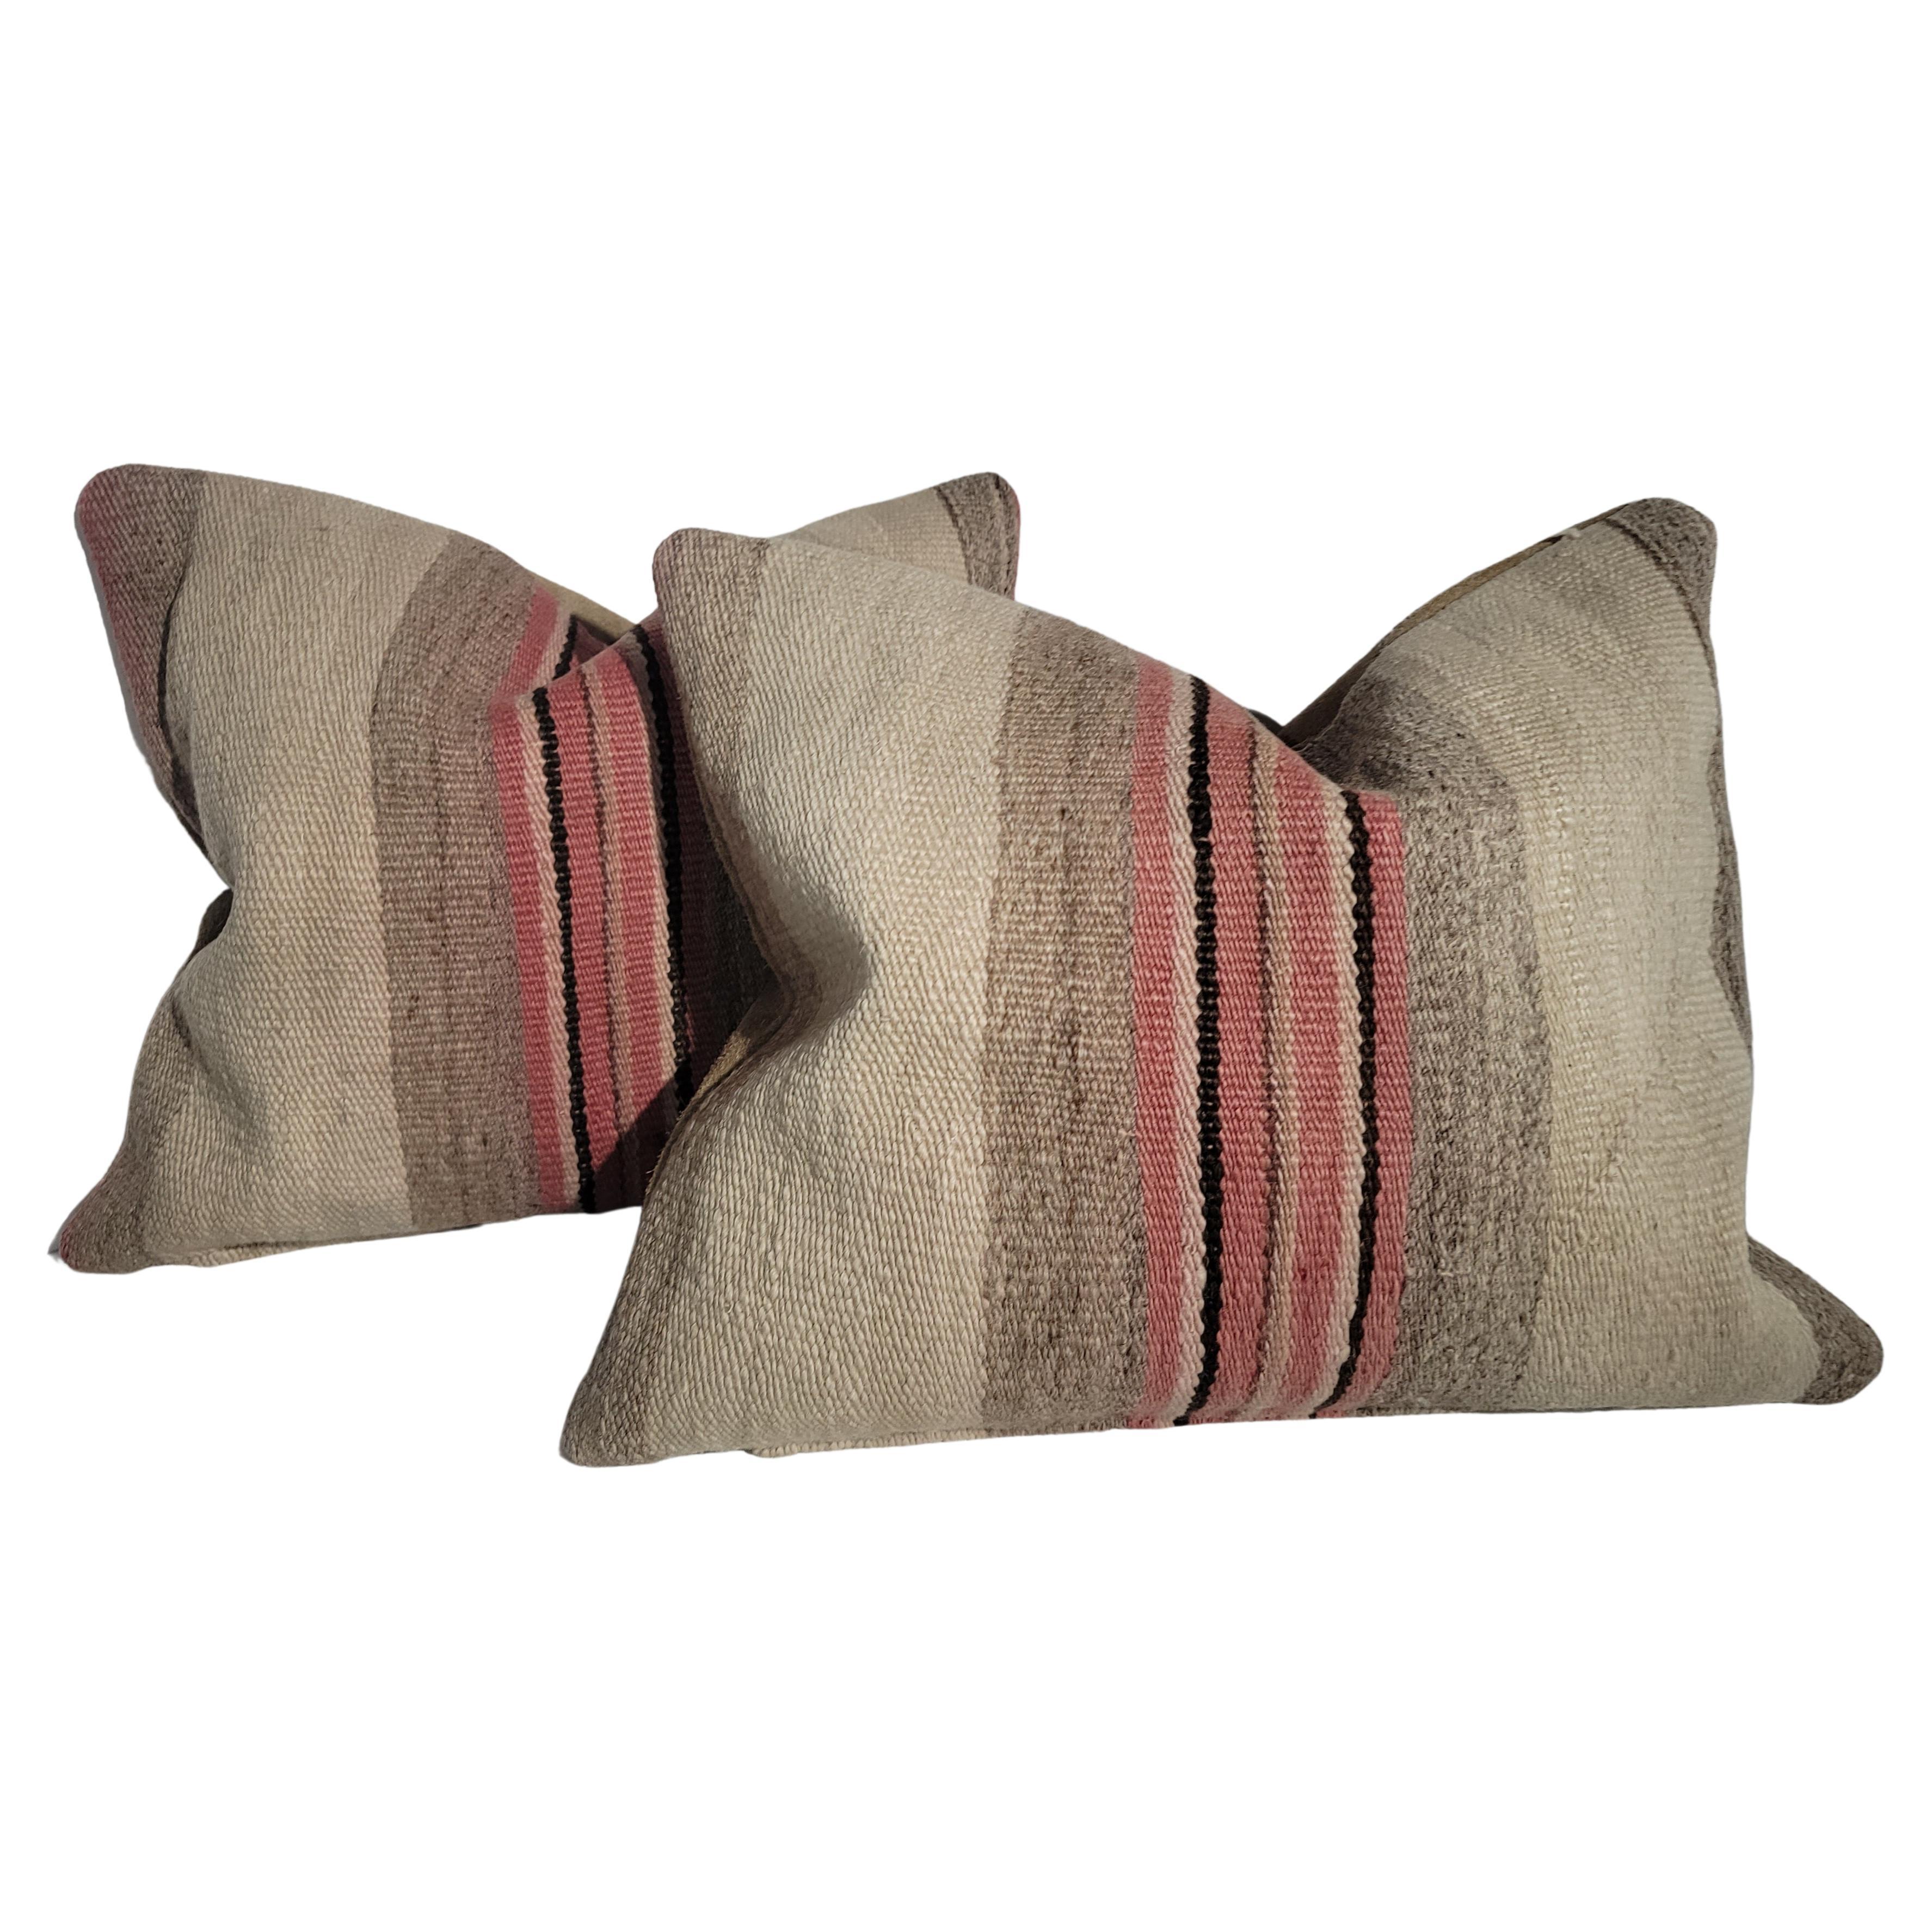 19th Century Navajo Indian Weaving Bolster Pillows -2 For Sale